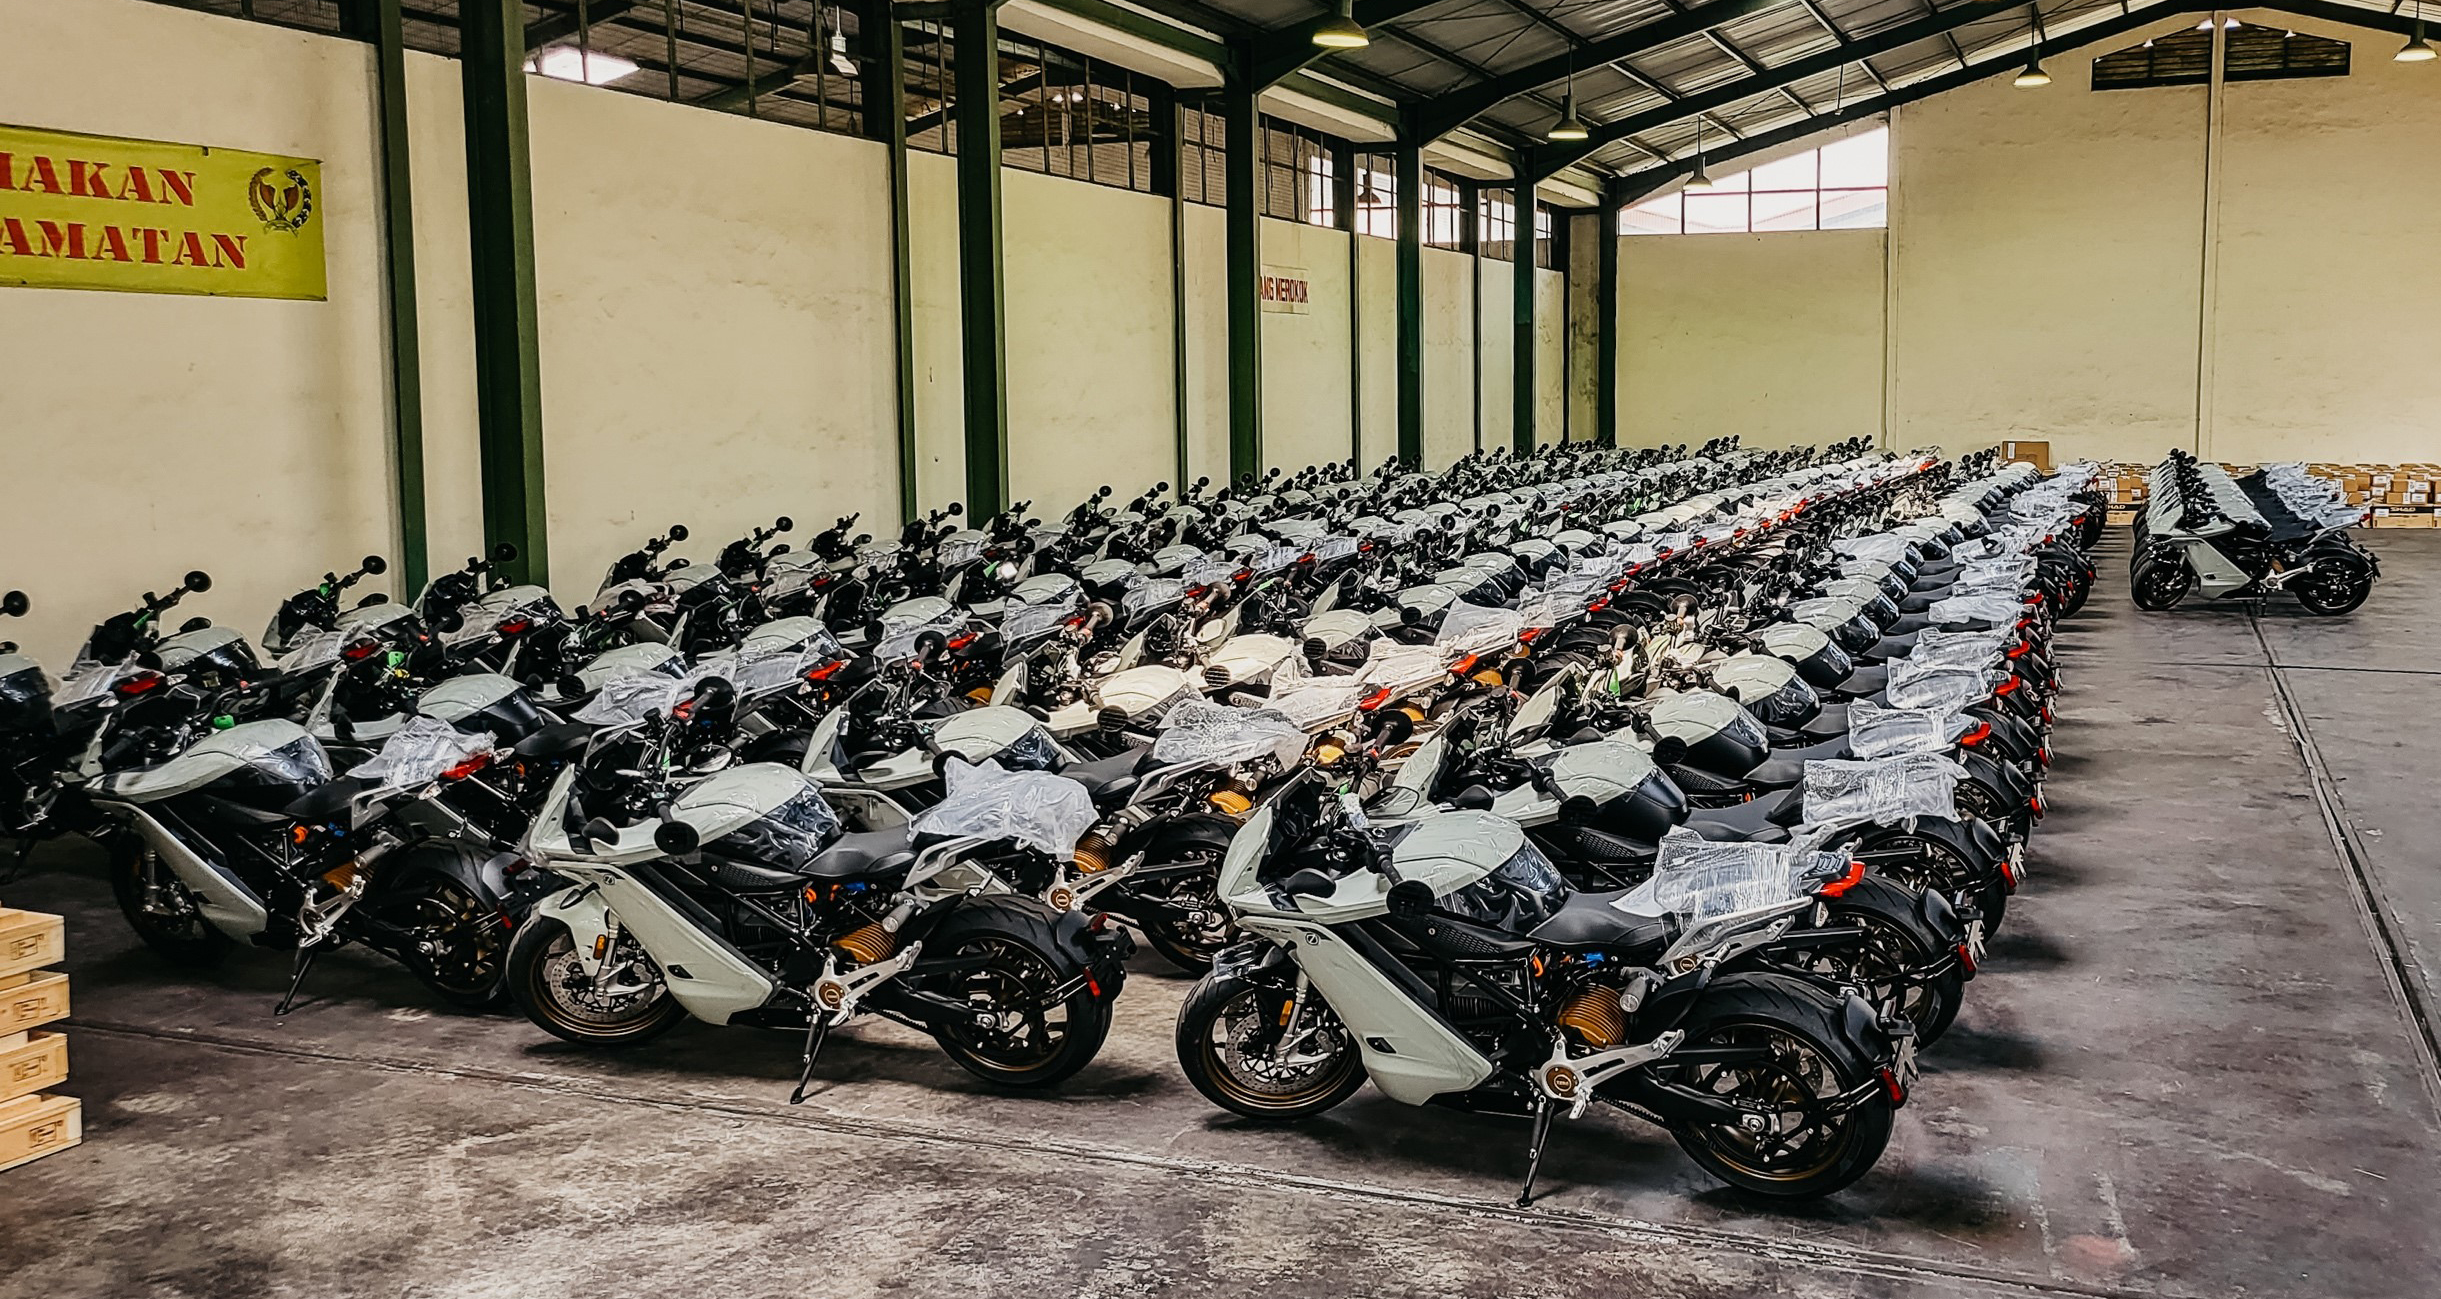 Indonesian Government purchases Zero Motorcycles to promote zero-emission goals